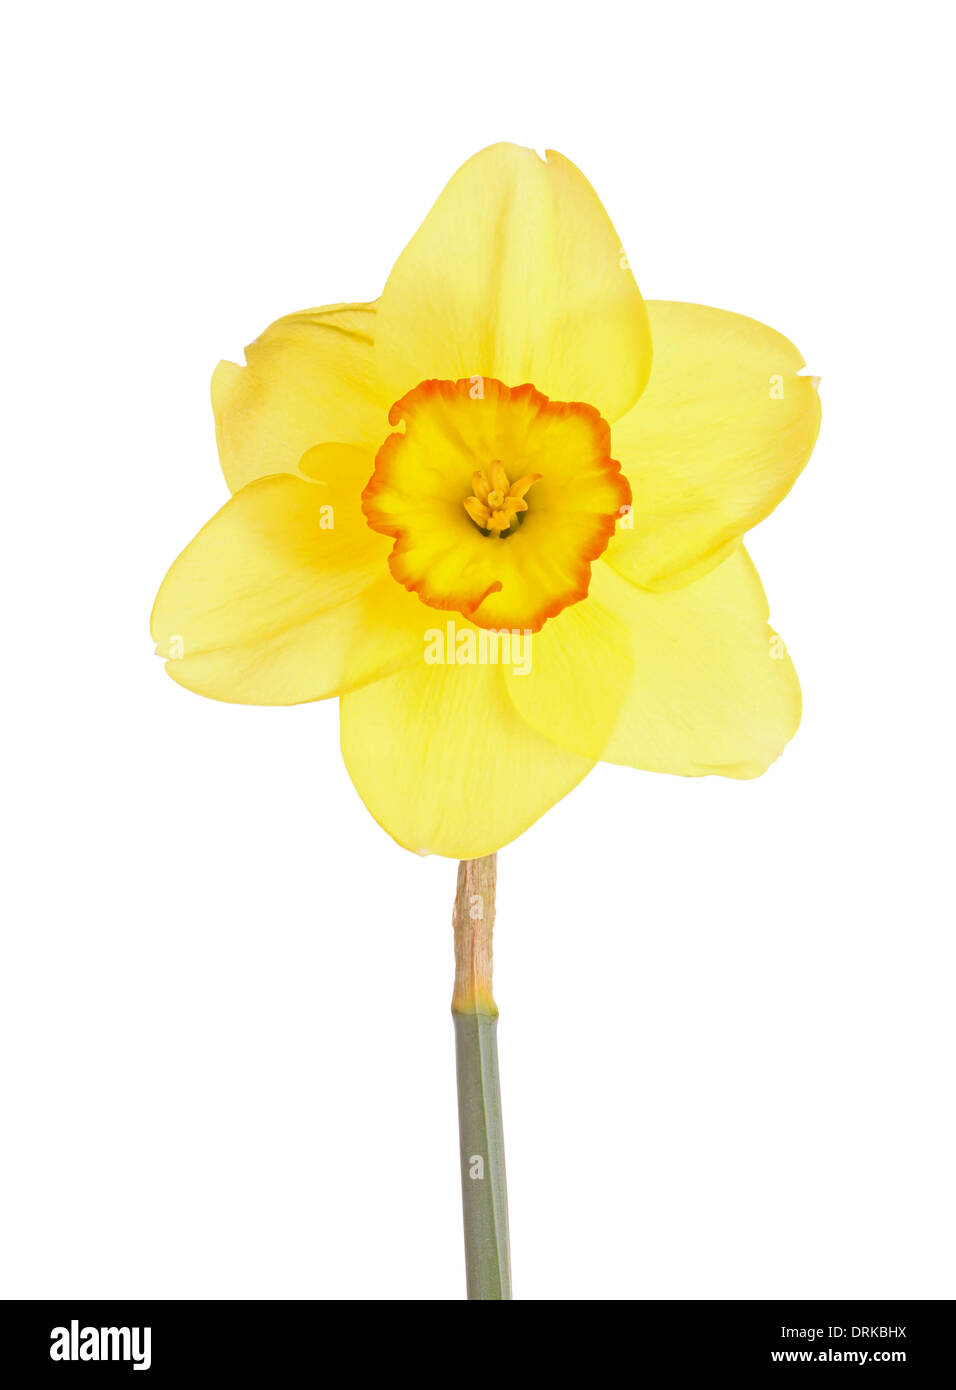 Single flower and stem of the yellow and red, small-cup daffodil cultivar Pacific Rim against a white background Stock Photo